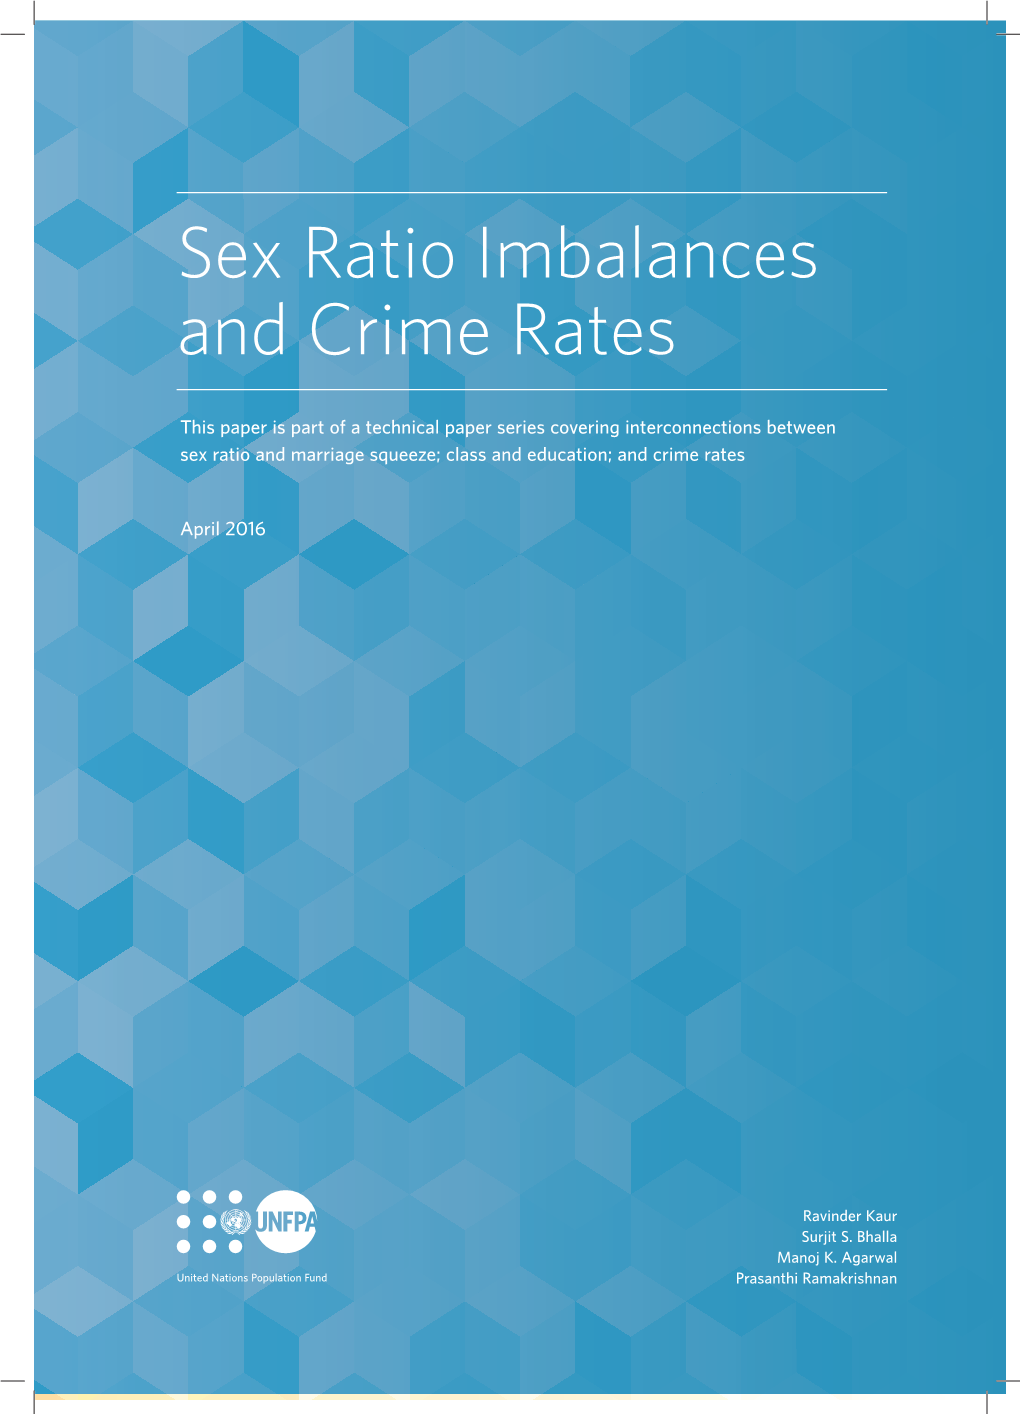 Sex Ratio Imbalances and Crime Rates.Indd